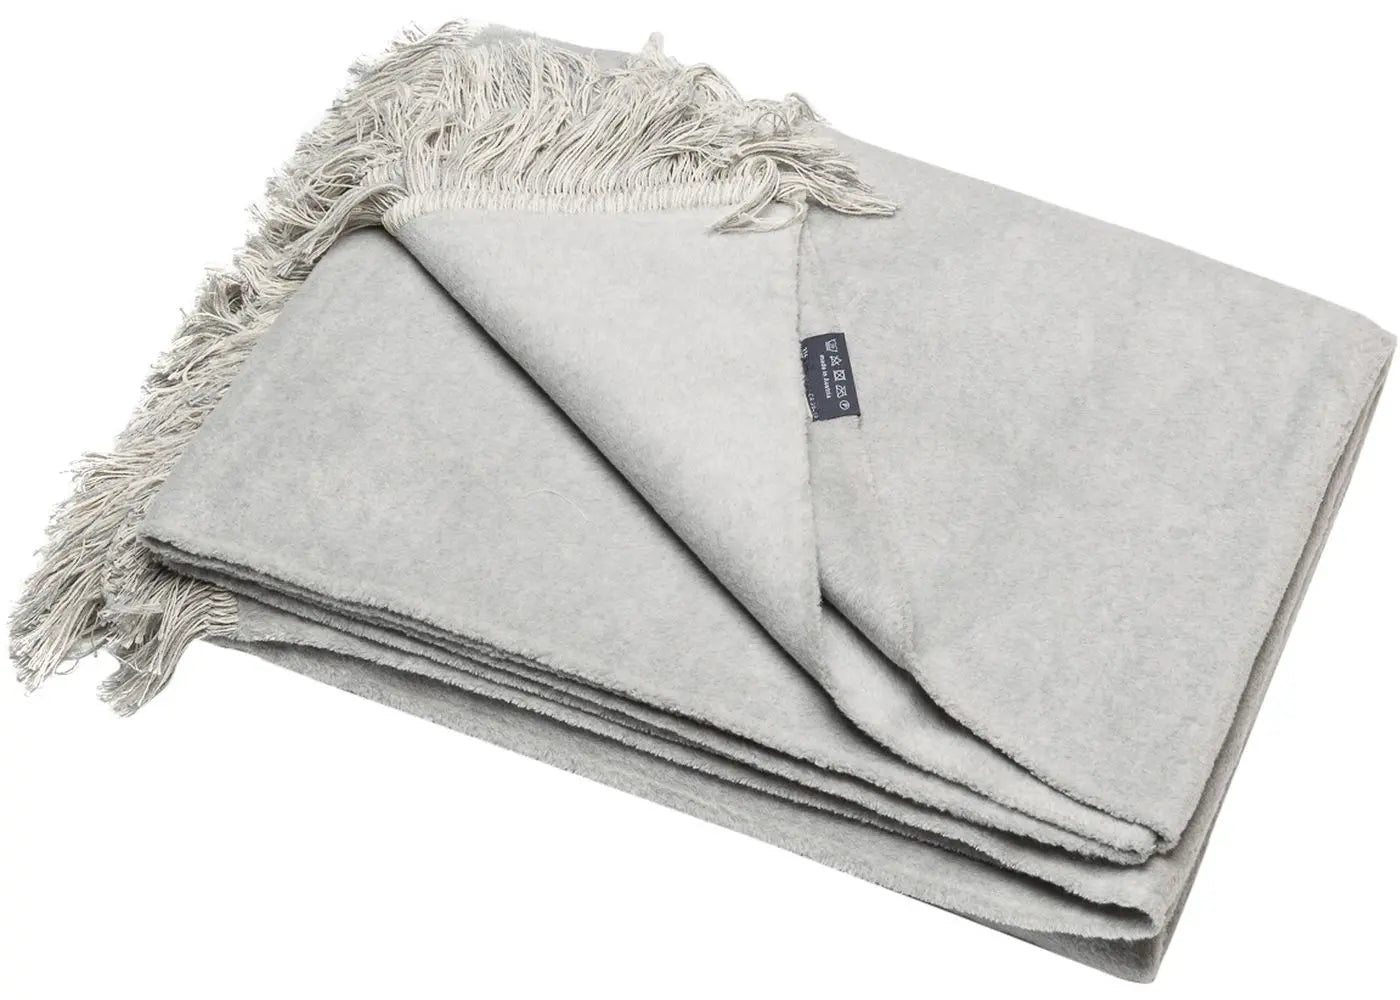 DAVID FUSSENEGGER BLANKET VIENNA WITH FRINGES (Available in 3 Colors)